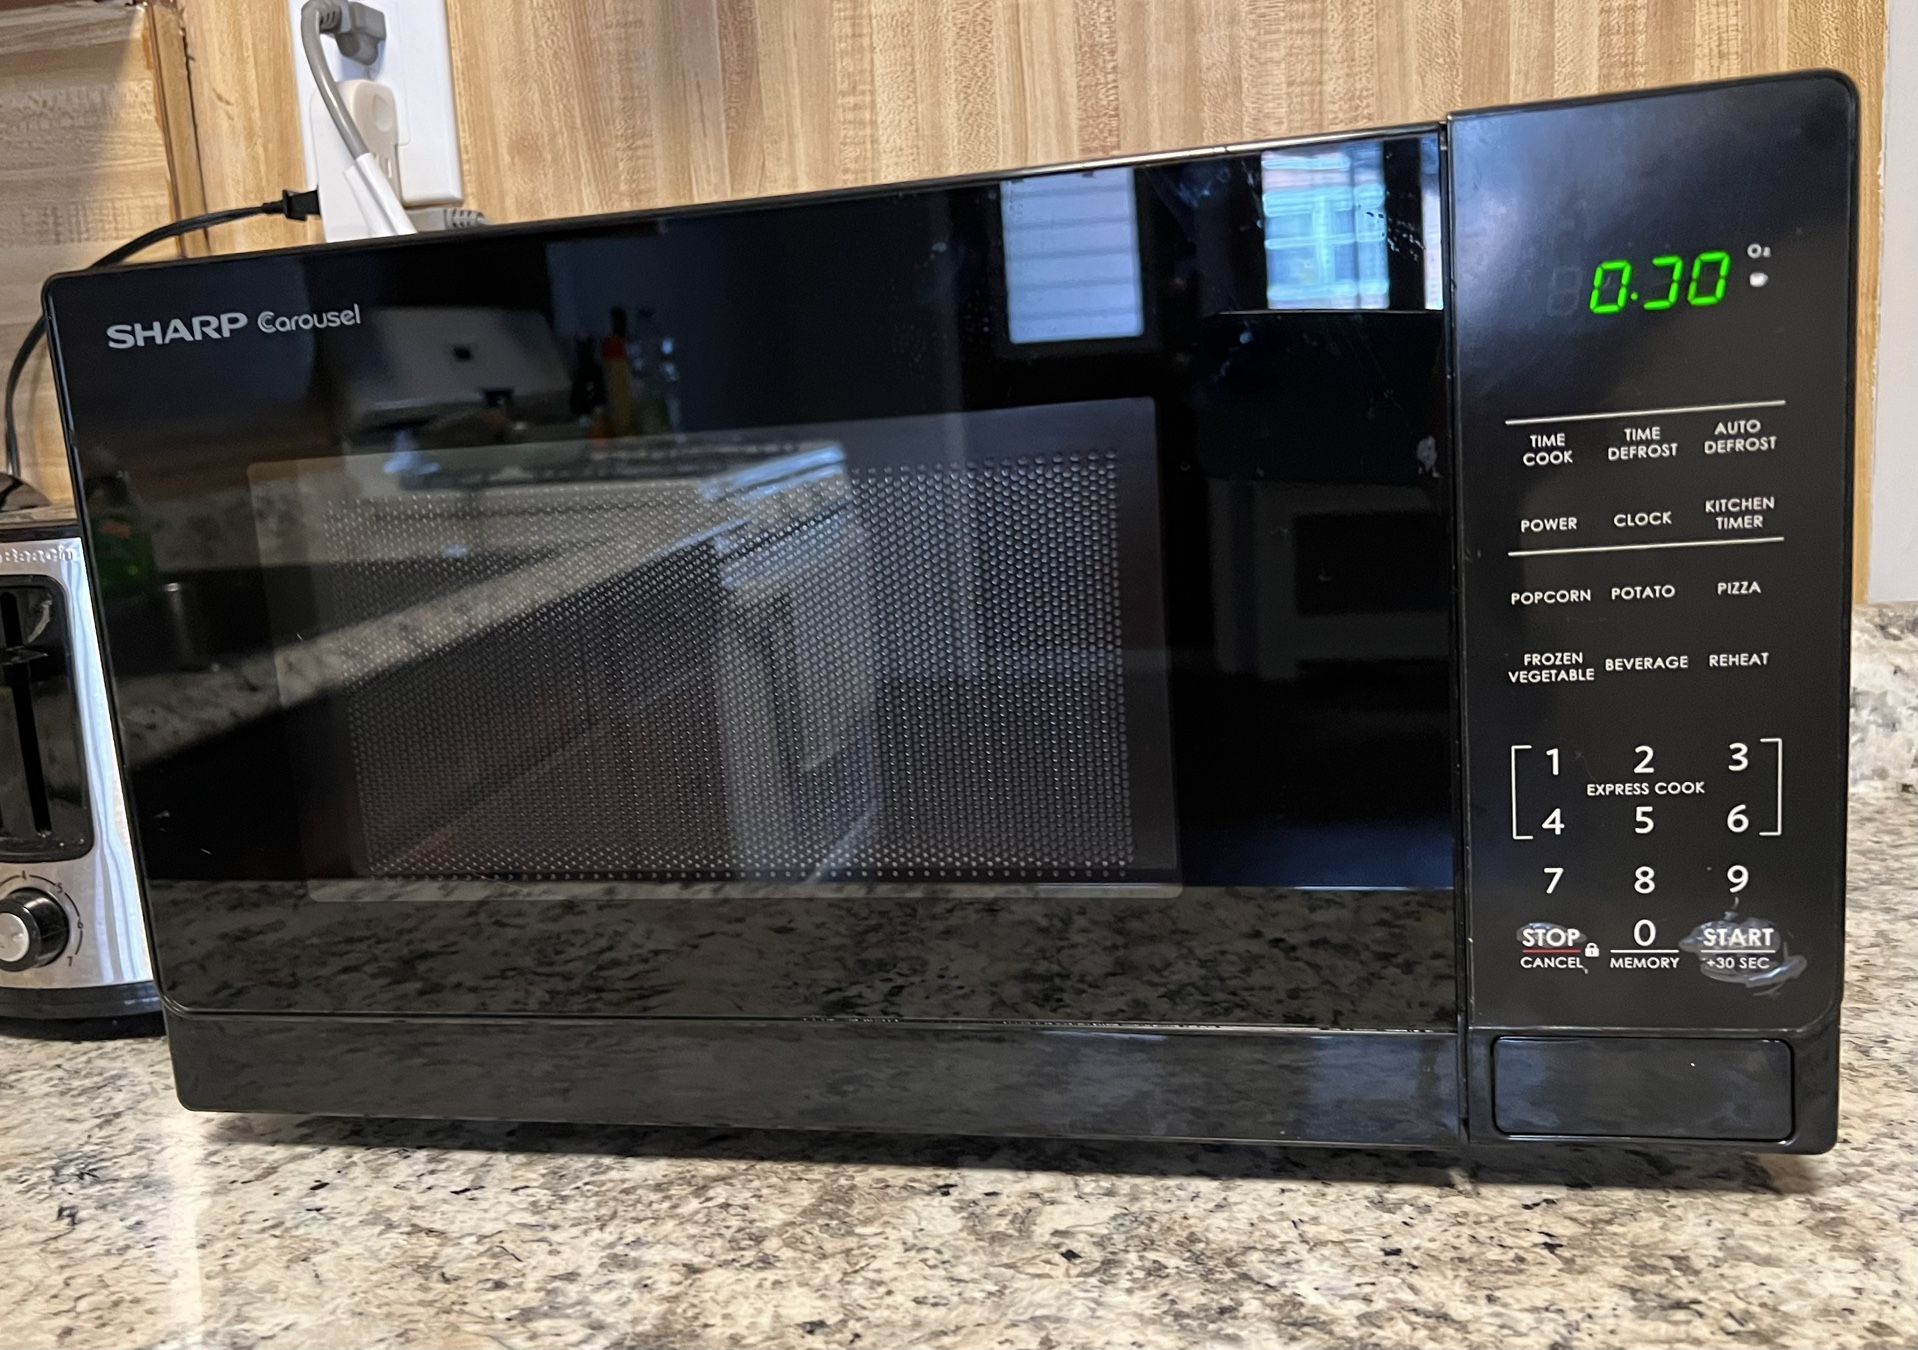 Microwave for sale for Sale in Queens, NY - OfferUp